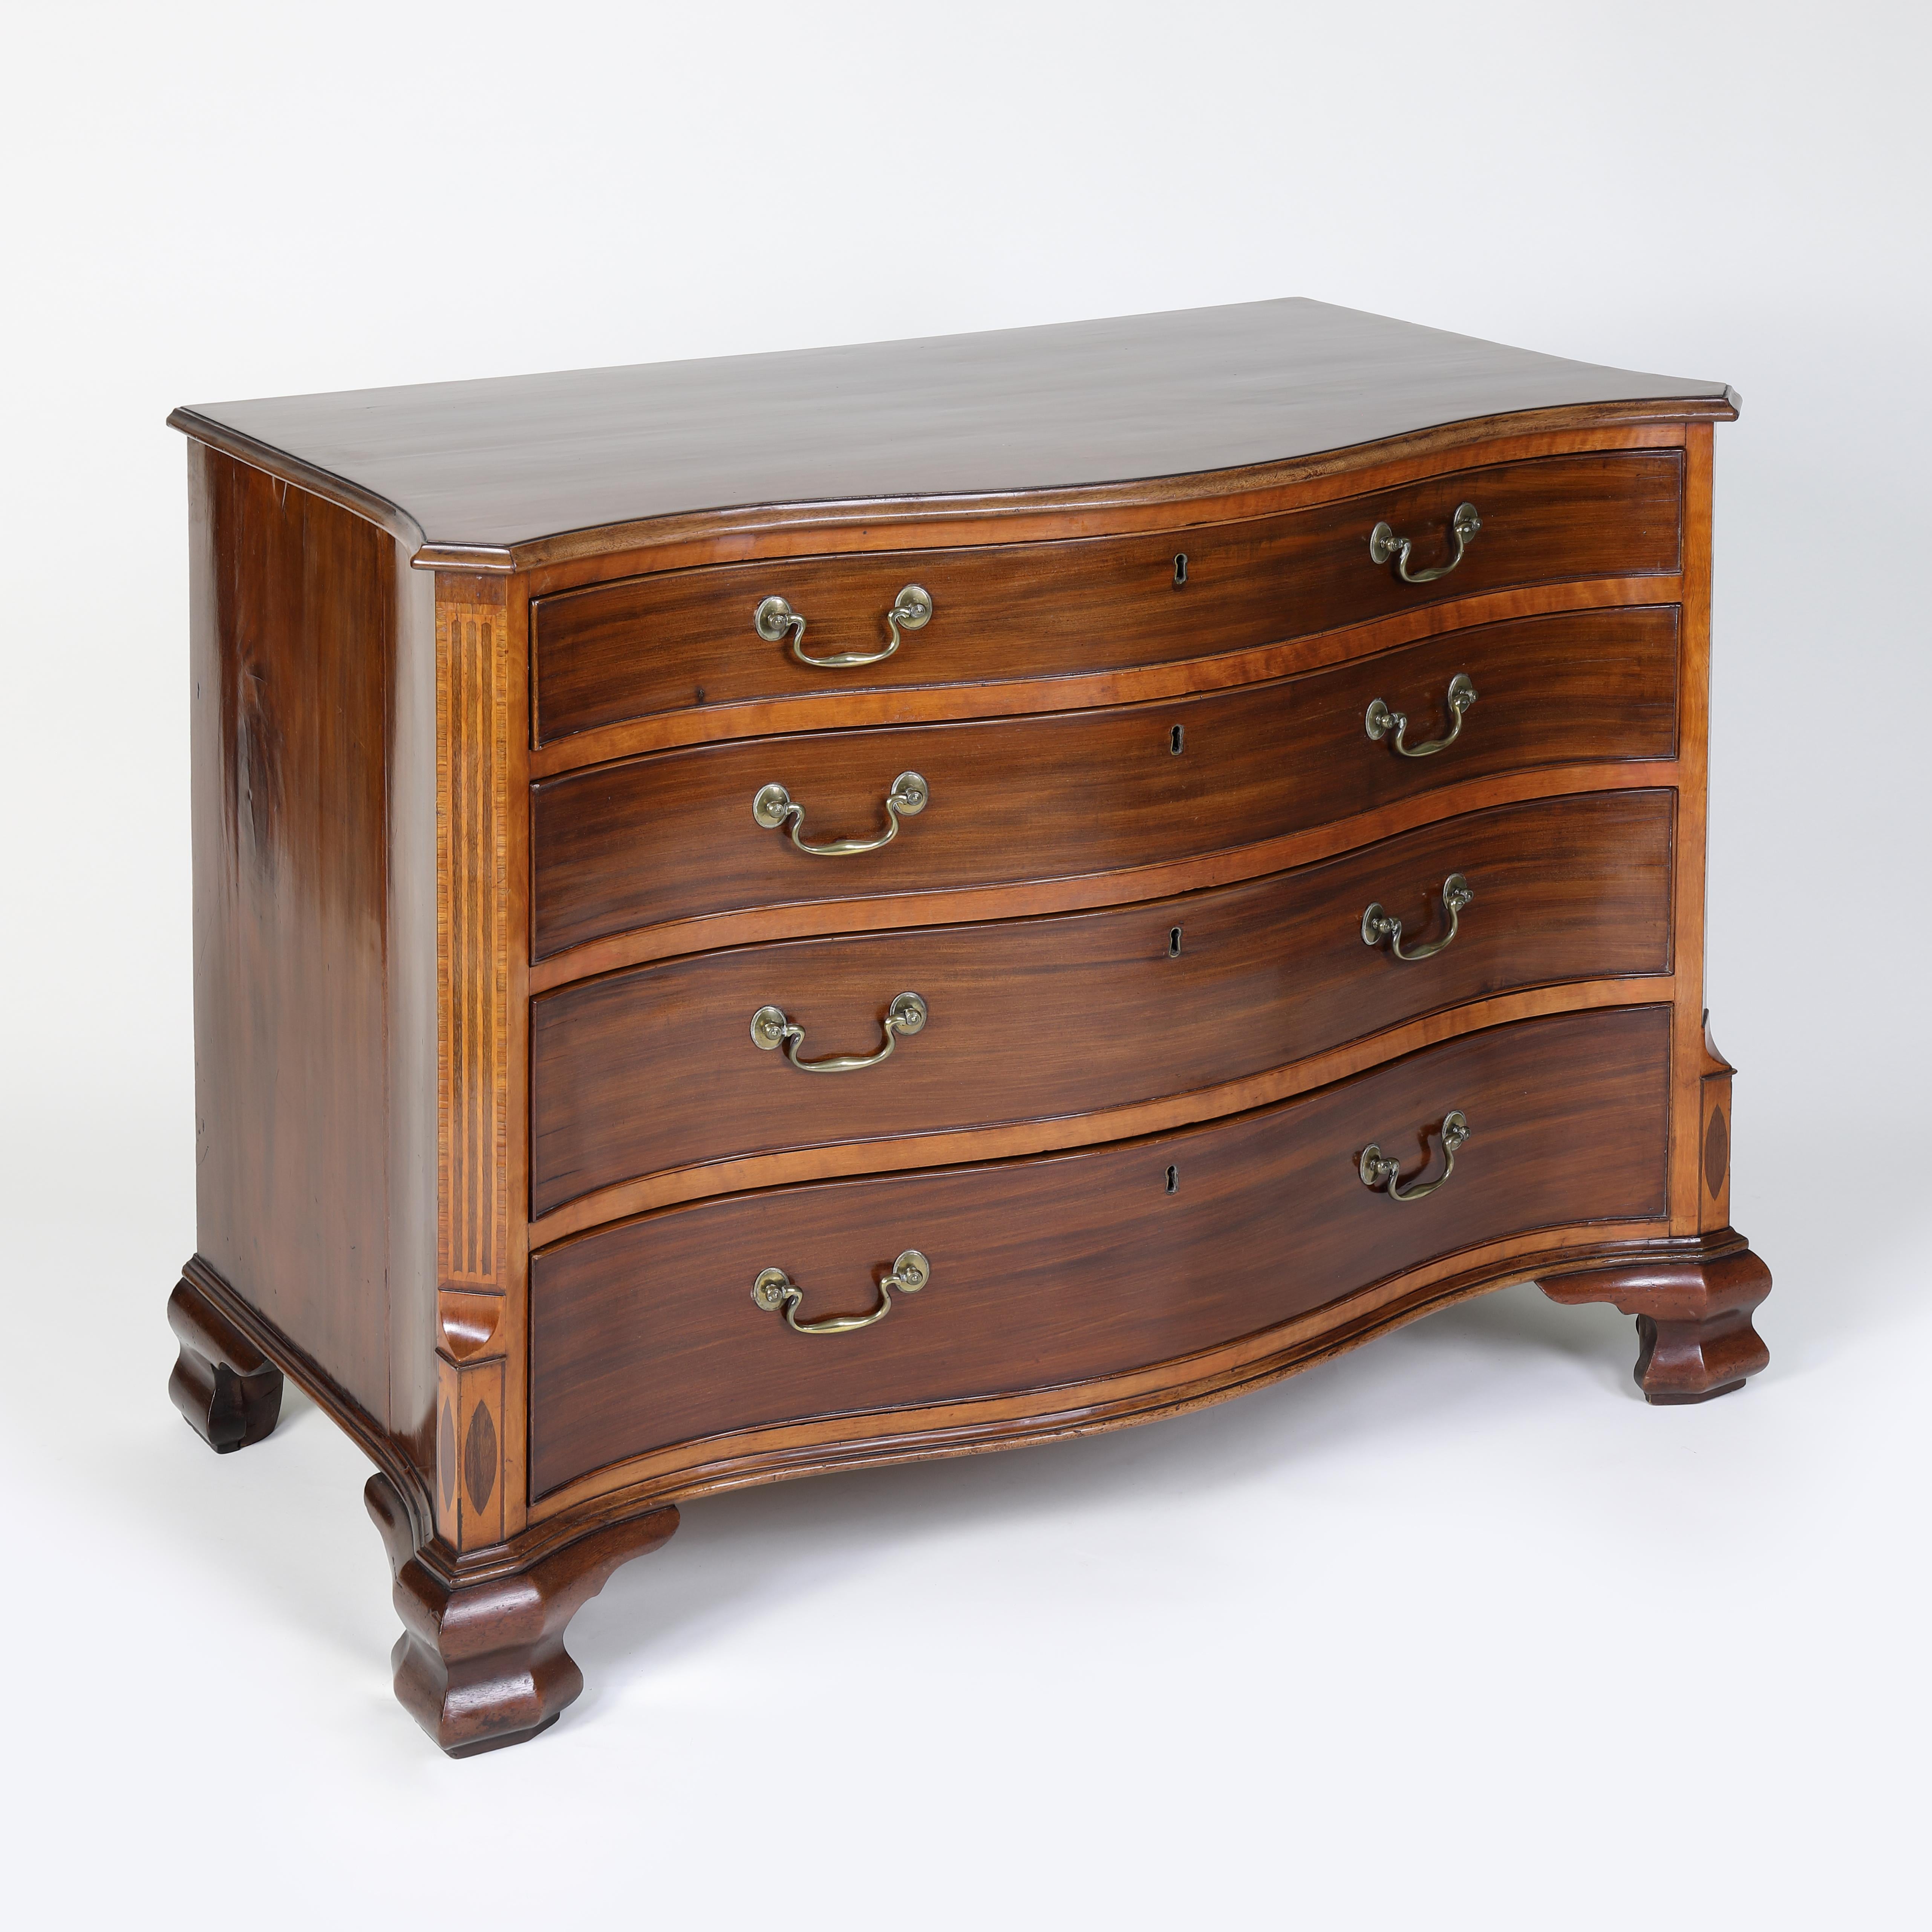 In The Manner of Ince and Mayhew
A fine quality mahogany serpentine shaped chest of drawers inlaid and cross-banded with satinwood. An incredibly smart and imposing commode in the manner of Ince and Mayhew. The shaped top with finely moulded edge